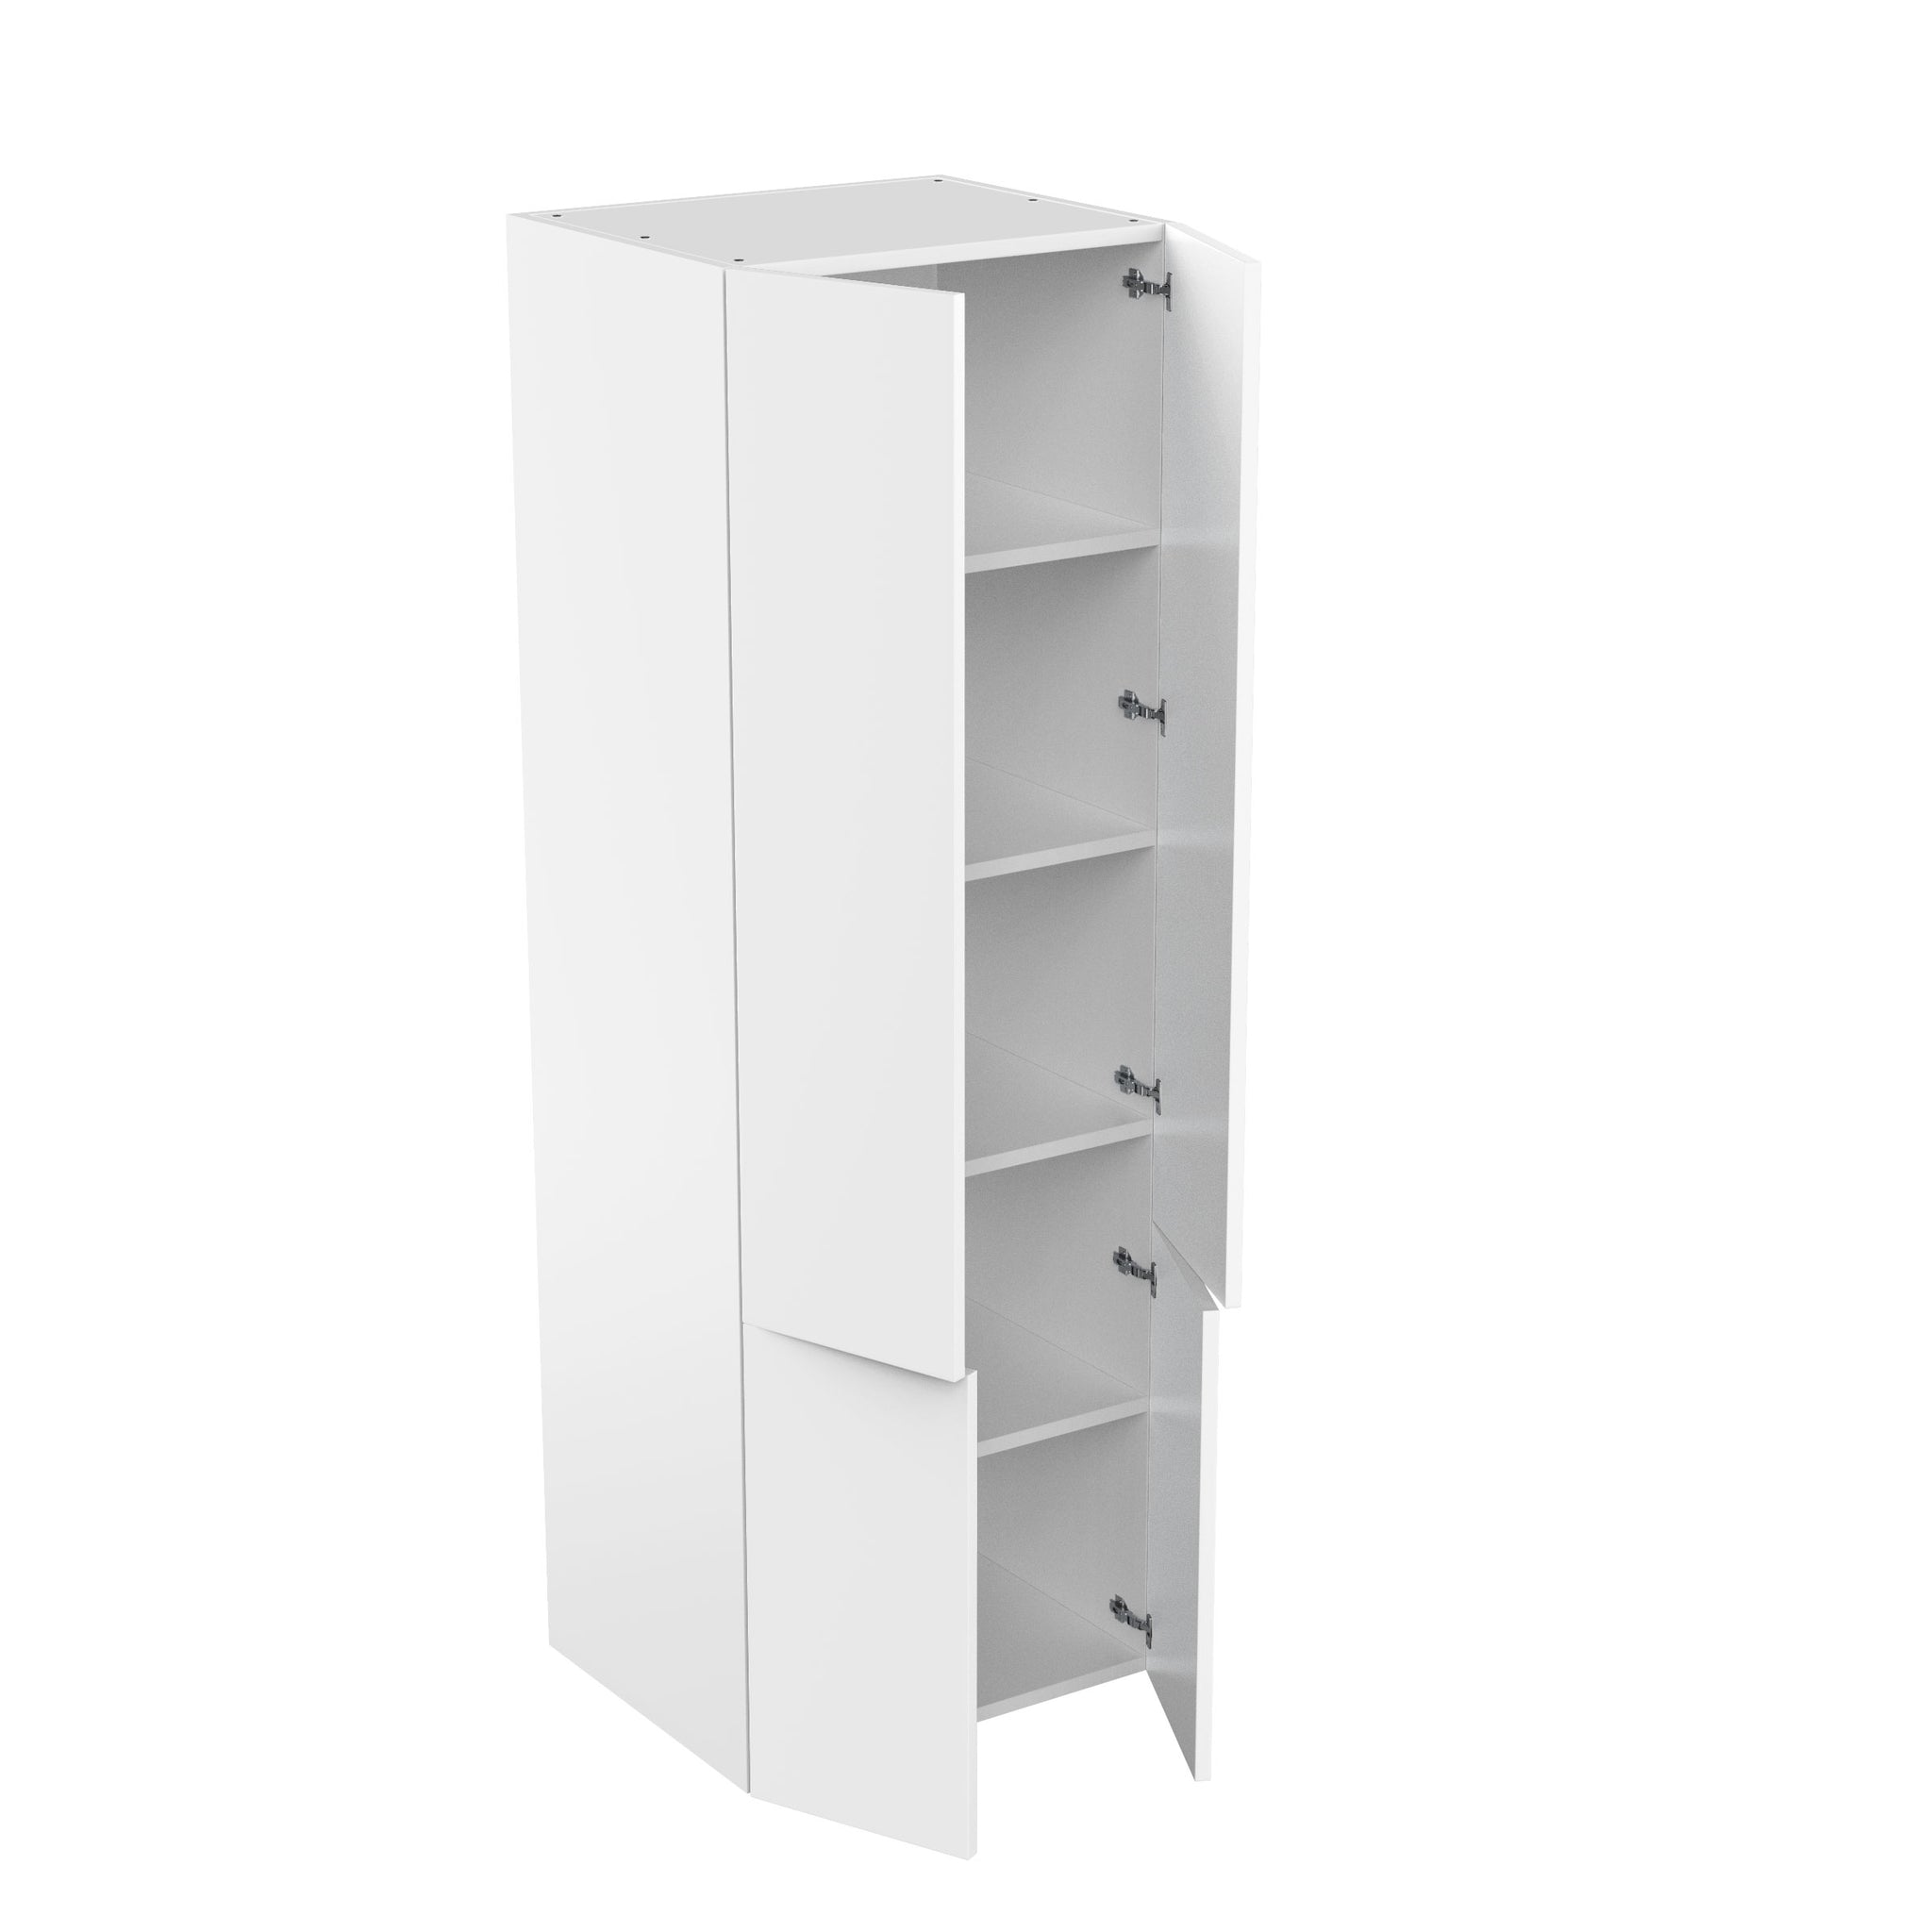 RTA - Glossy White - Double Door Tall Cabinets | 30"W x 90"H x 23.8"D